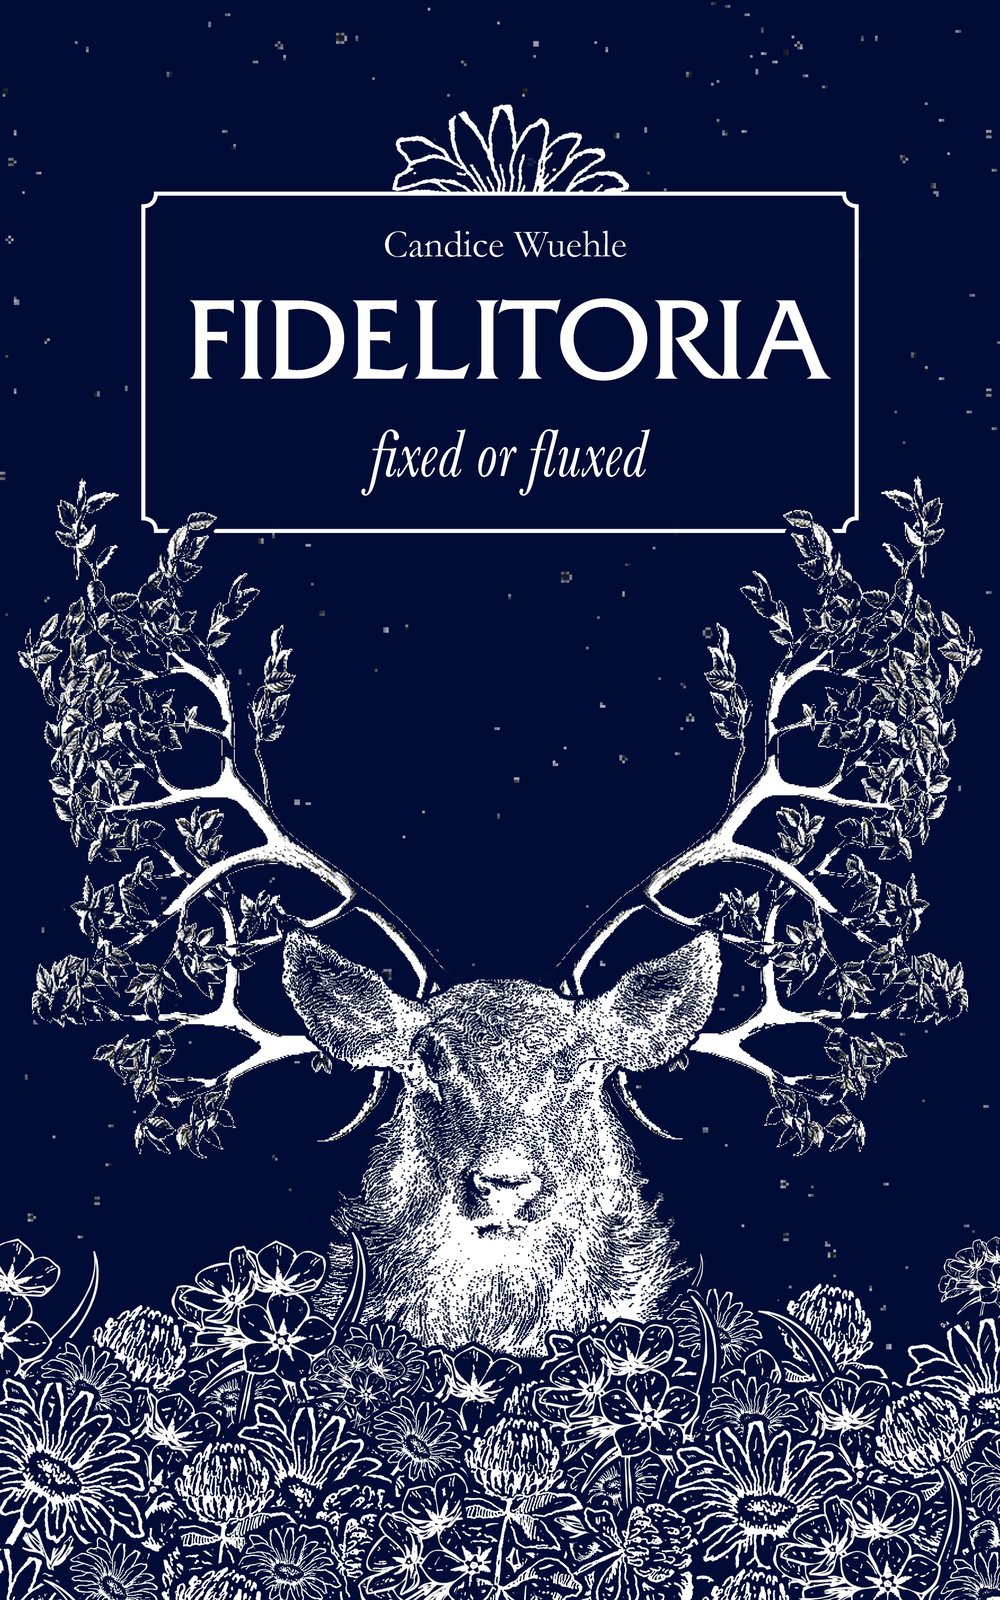 'Fidelitoria: Fixed or Fluxed' by Candice Wuehle + Divination Board